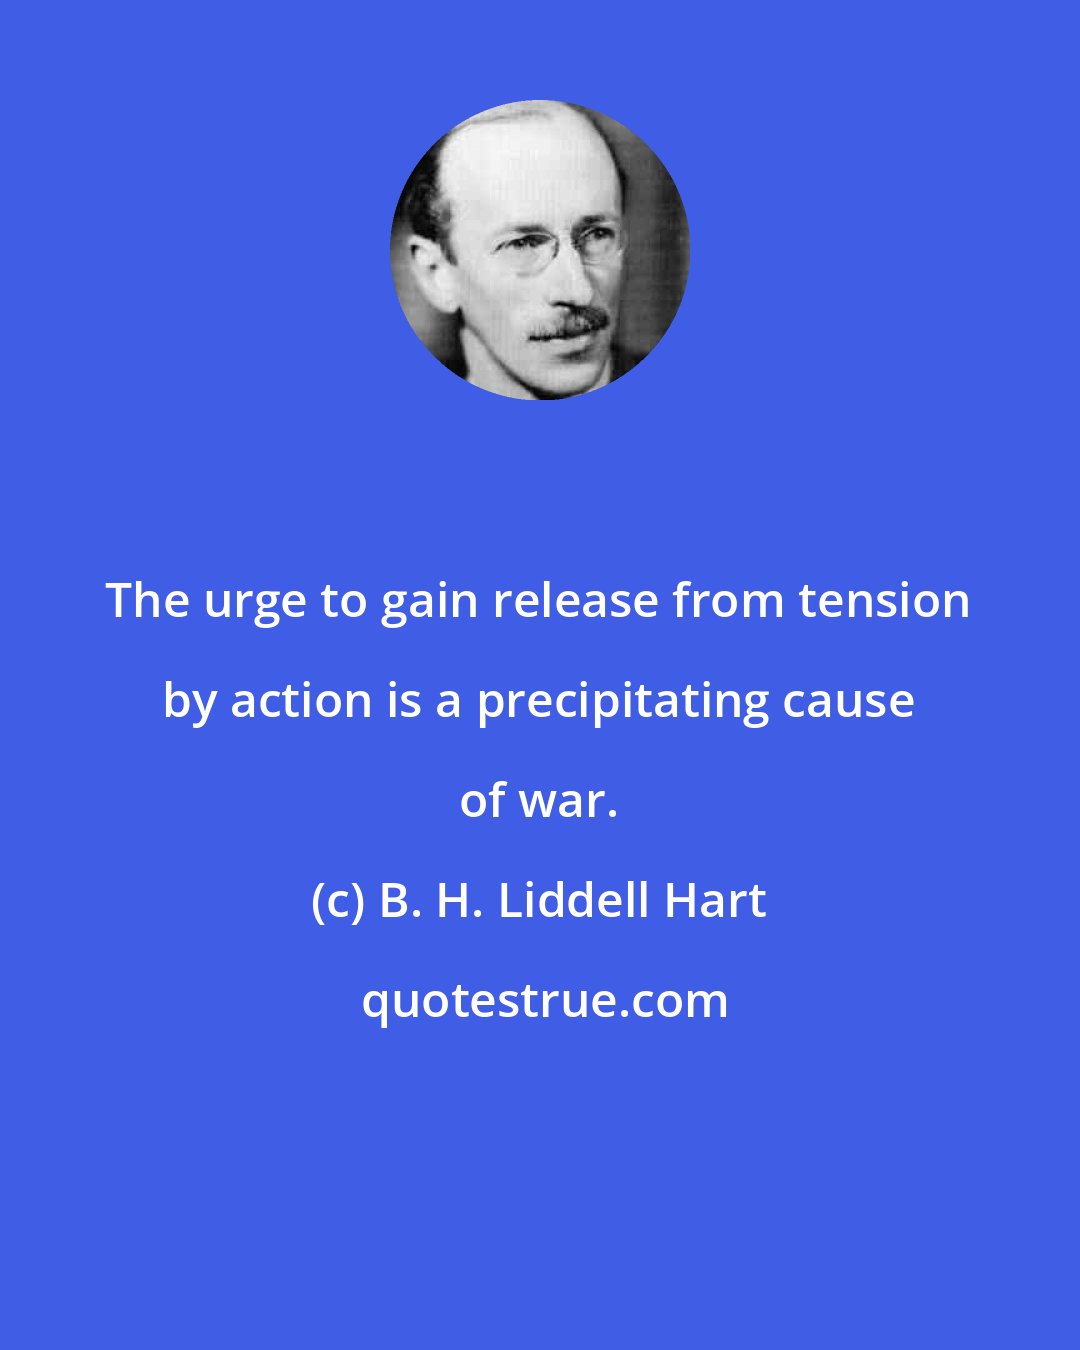 B. H. Liddell Hart: The urge to gain release from tension by action is a precipitating cause of war.